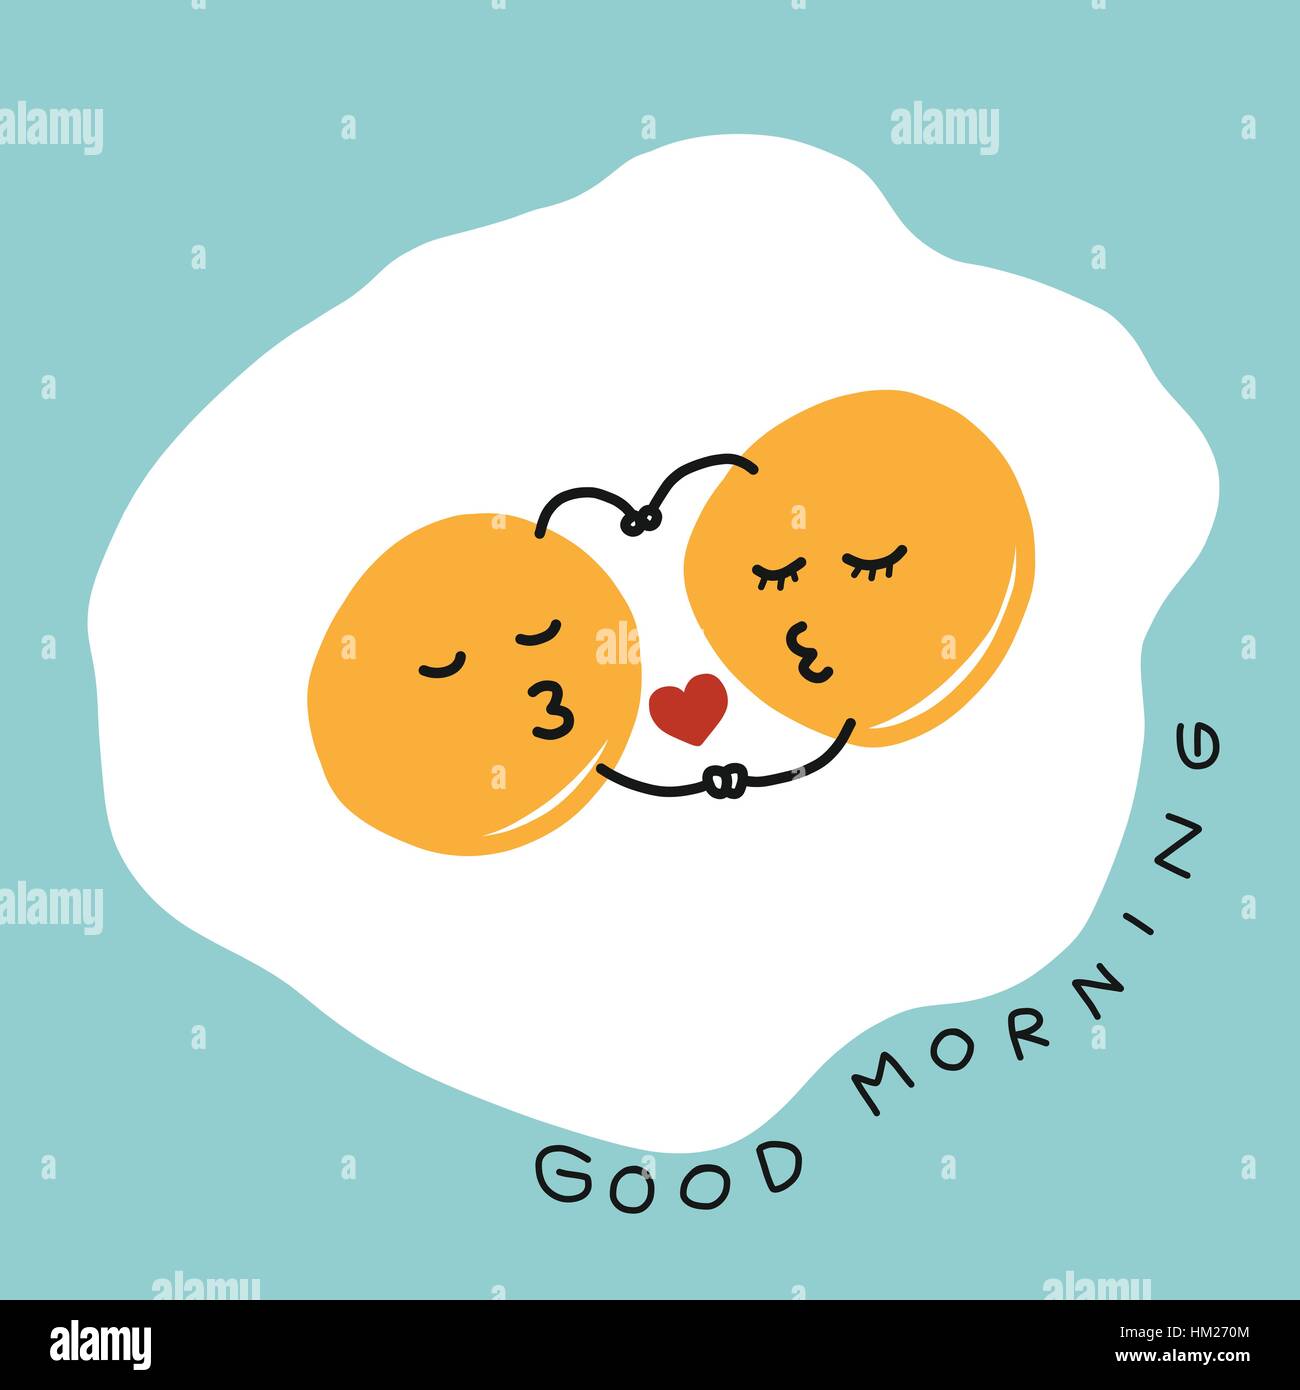 Fired eggs hug and kiss and good morning word cartoon vector illustration on blue background Stock Vector